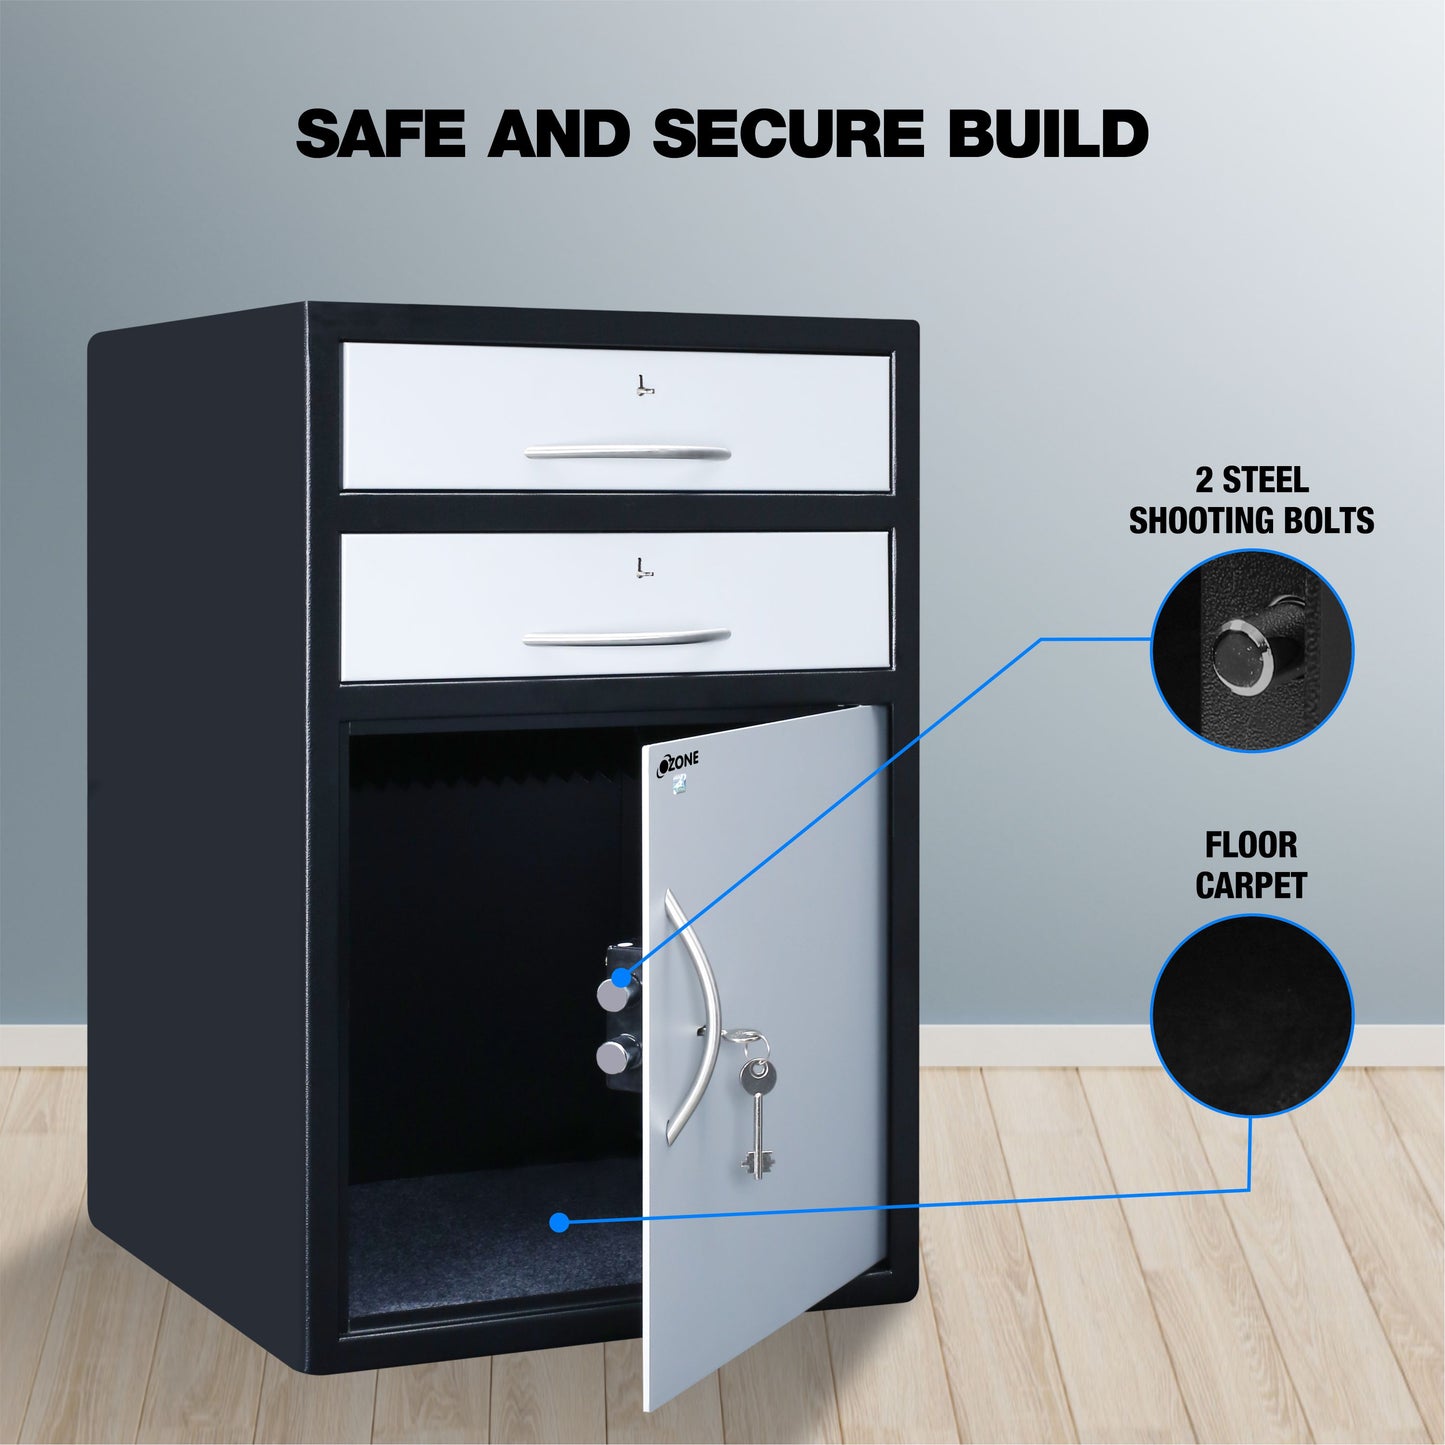 Ozone Multi-purpose Safe for Retail Spaces | High-security Mechanical Key (92 Ltrs.)